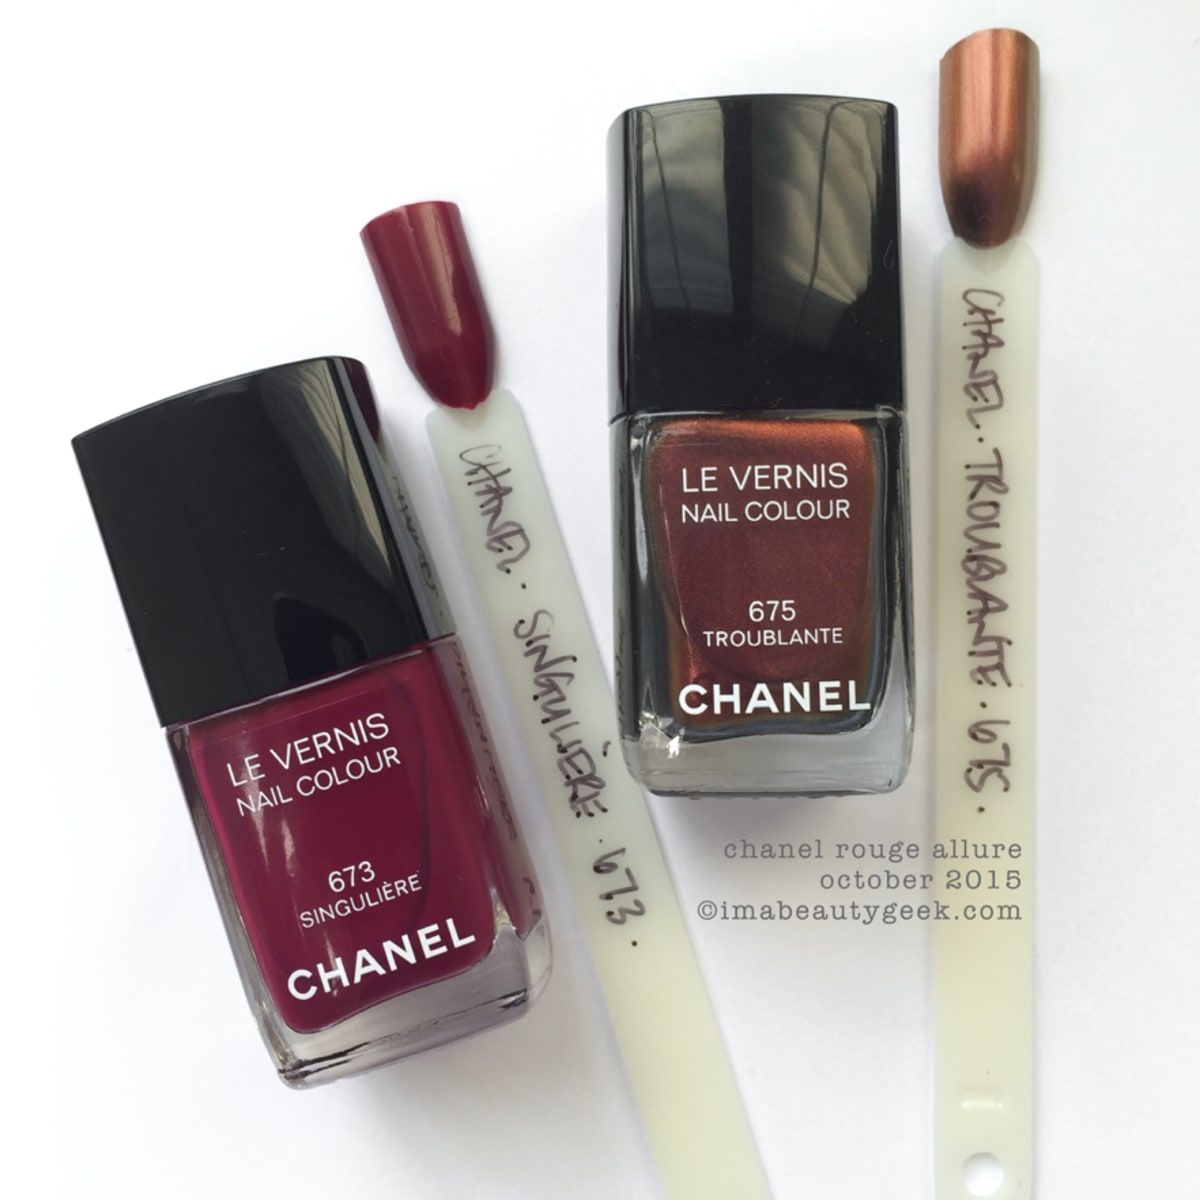 Chanel Troublante, Rose Fusion Le Vernis and Le Top Coat Lame